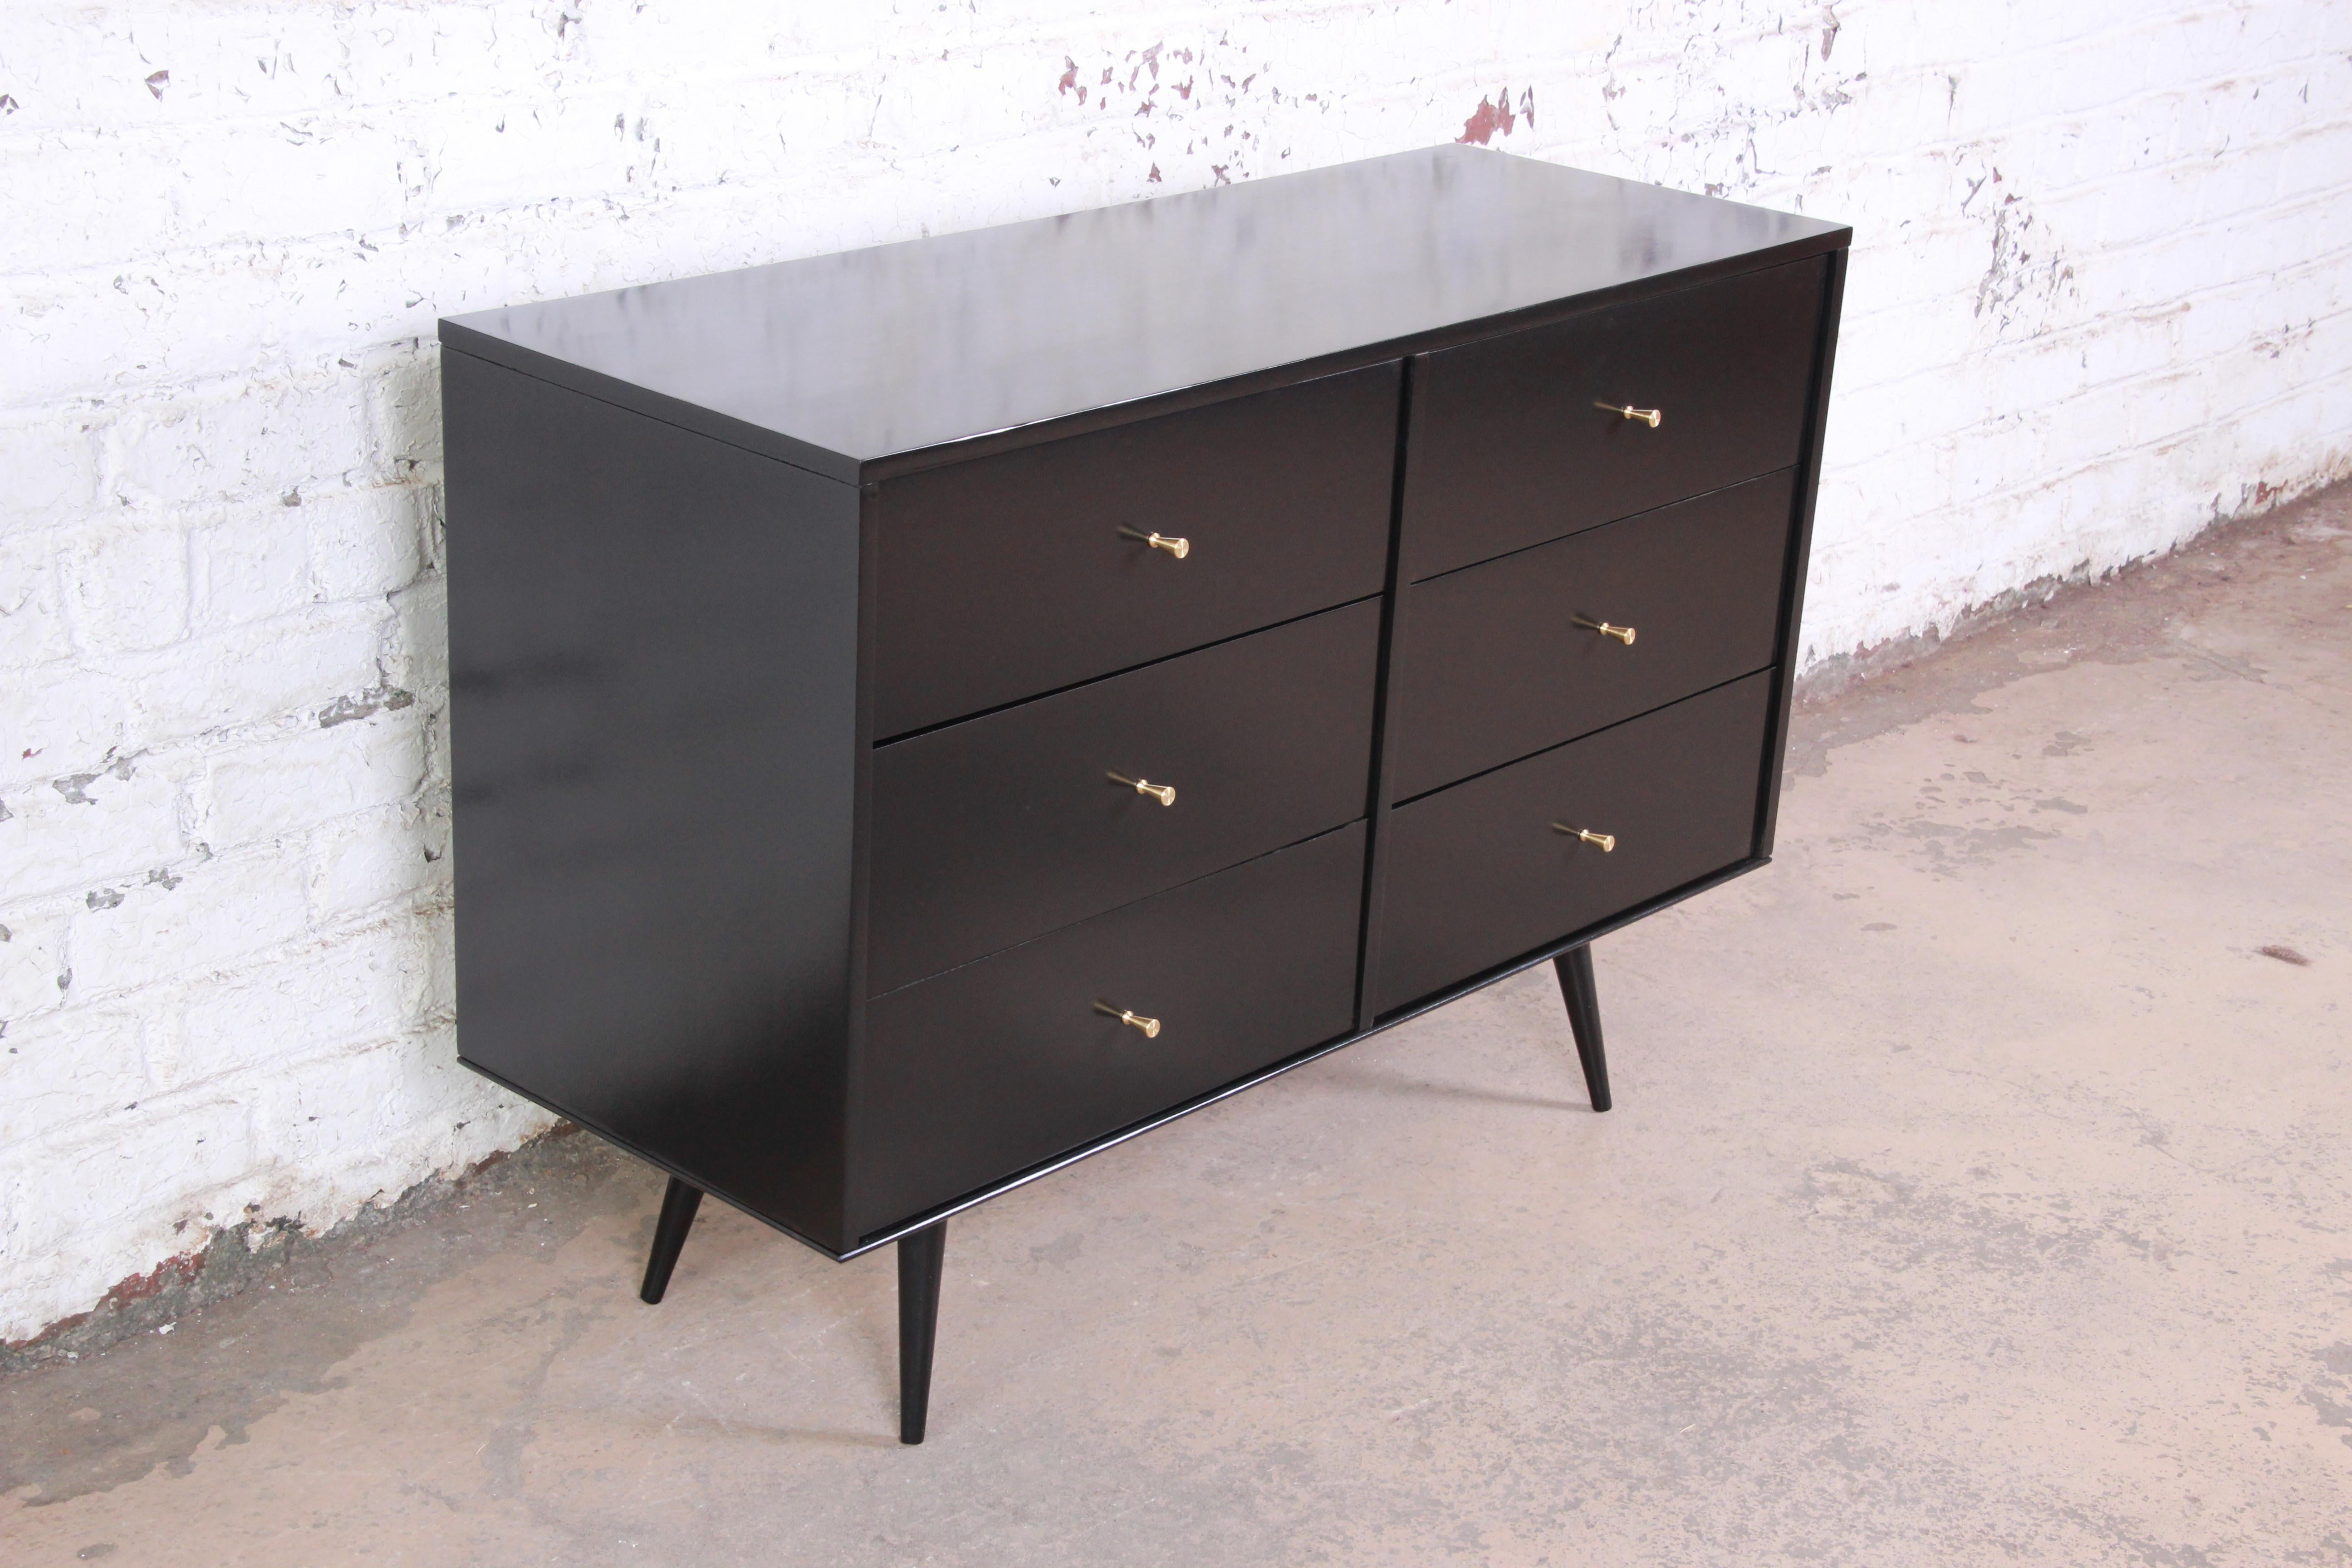 An excellent six-drawer black lacquered Planner Group dresser by Paul McCobb. The dresser sits upon splayed legs and offers six smooth sliding drawers with iconic brass pulls from this McCobb line. The dresser has simply mid-century modern lines as